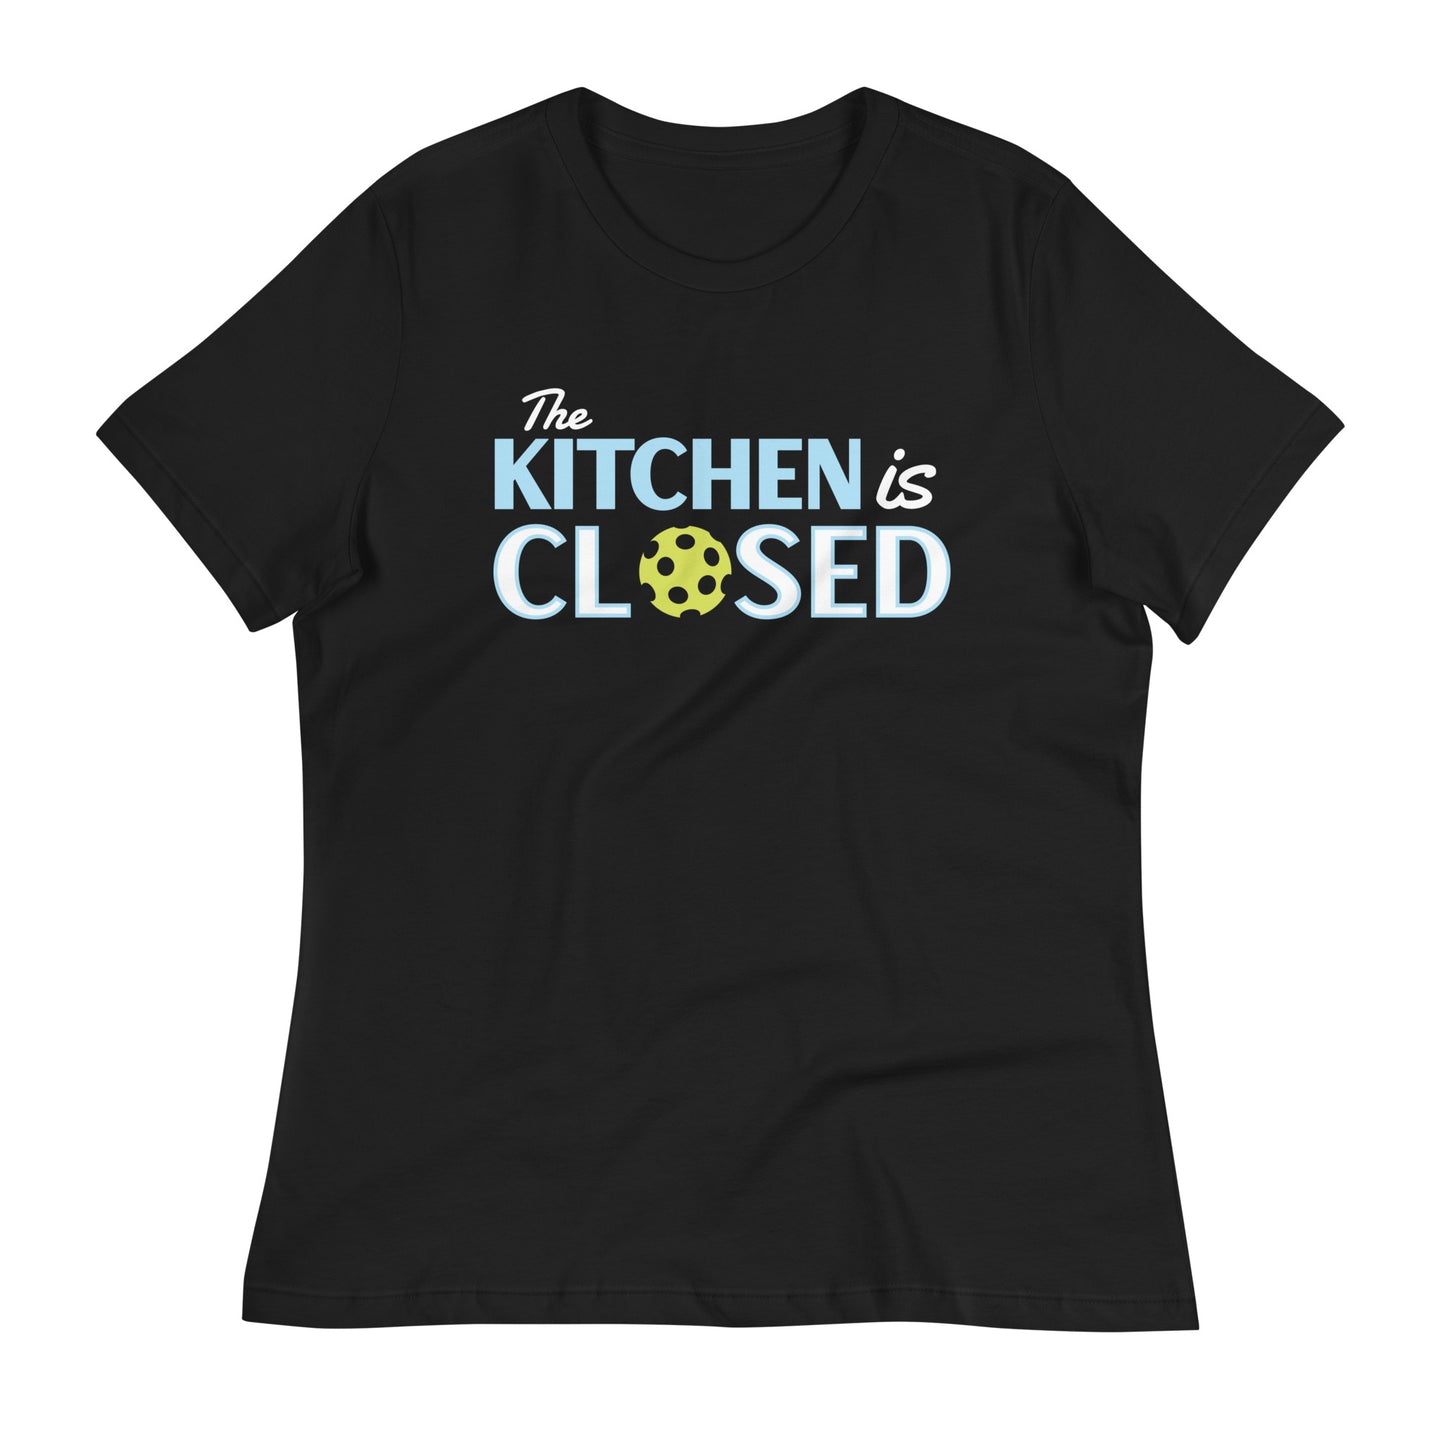 The Kitchen Is Closed Women's Signature Tee